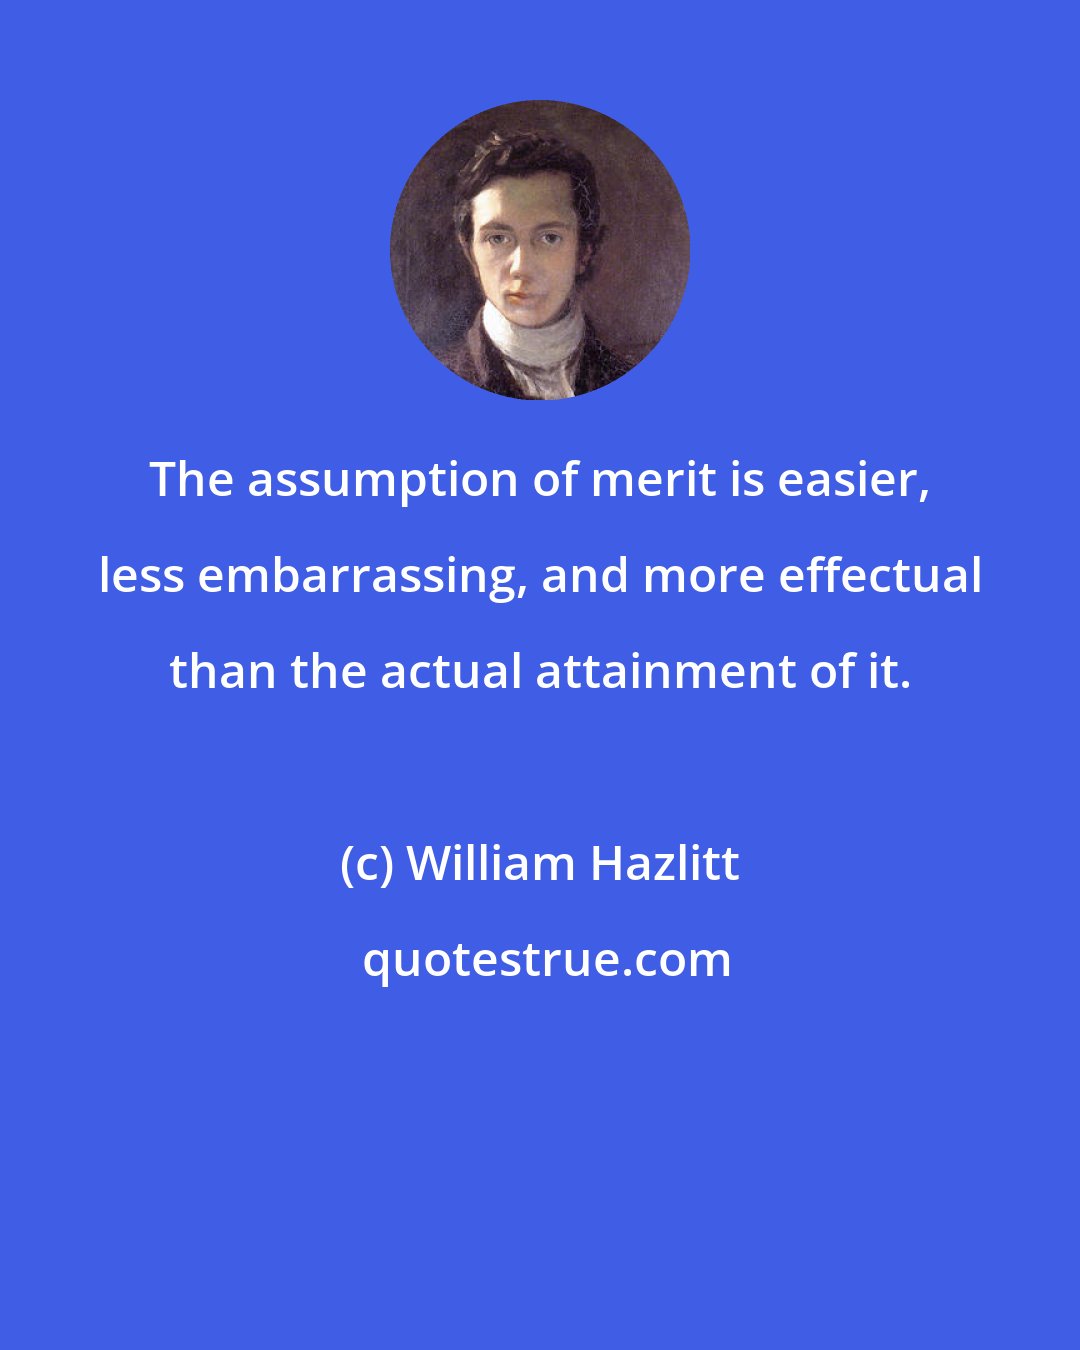 William Hazlitt: The assumption of merit is easier, less embarrassing, and more effectual than the actual attainment of it.